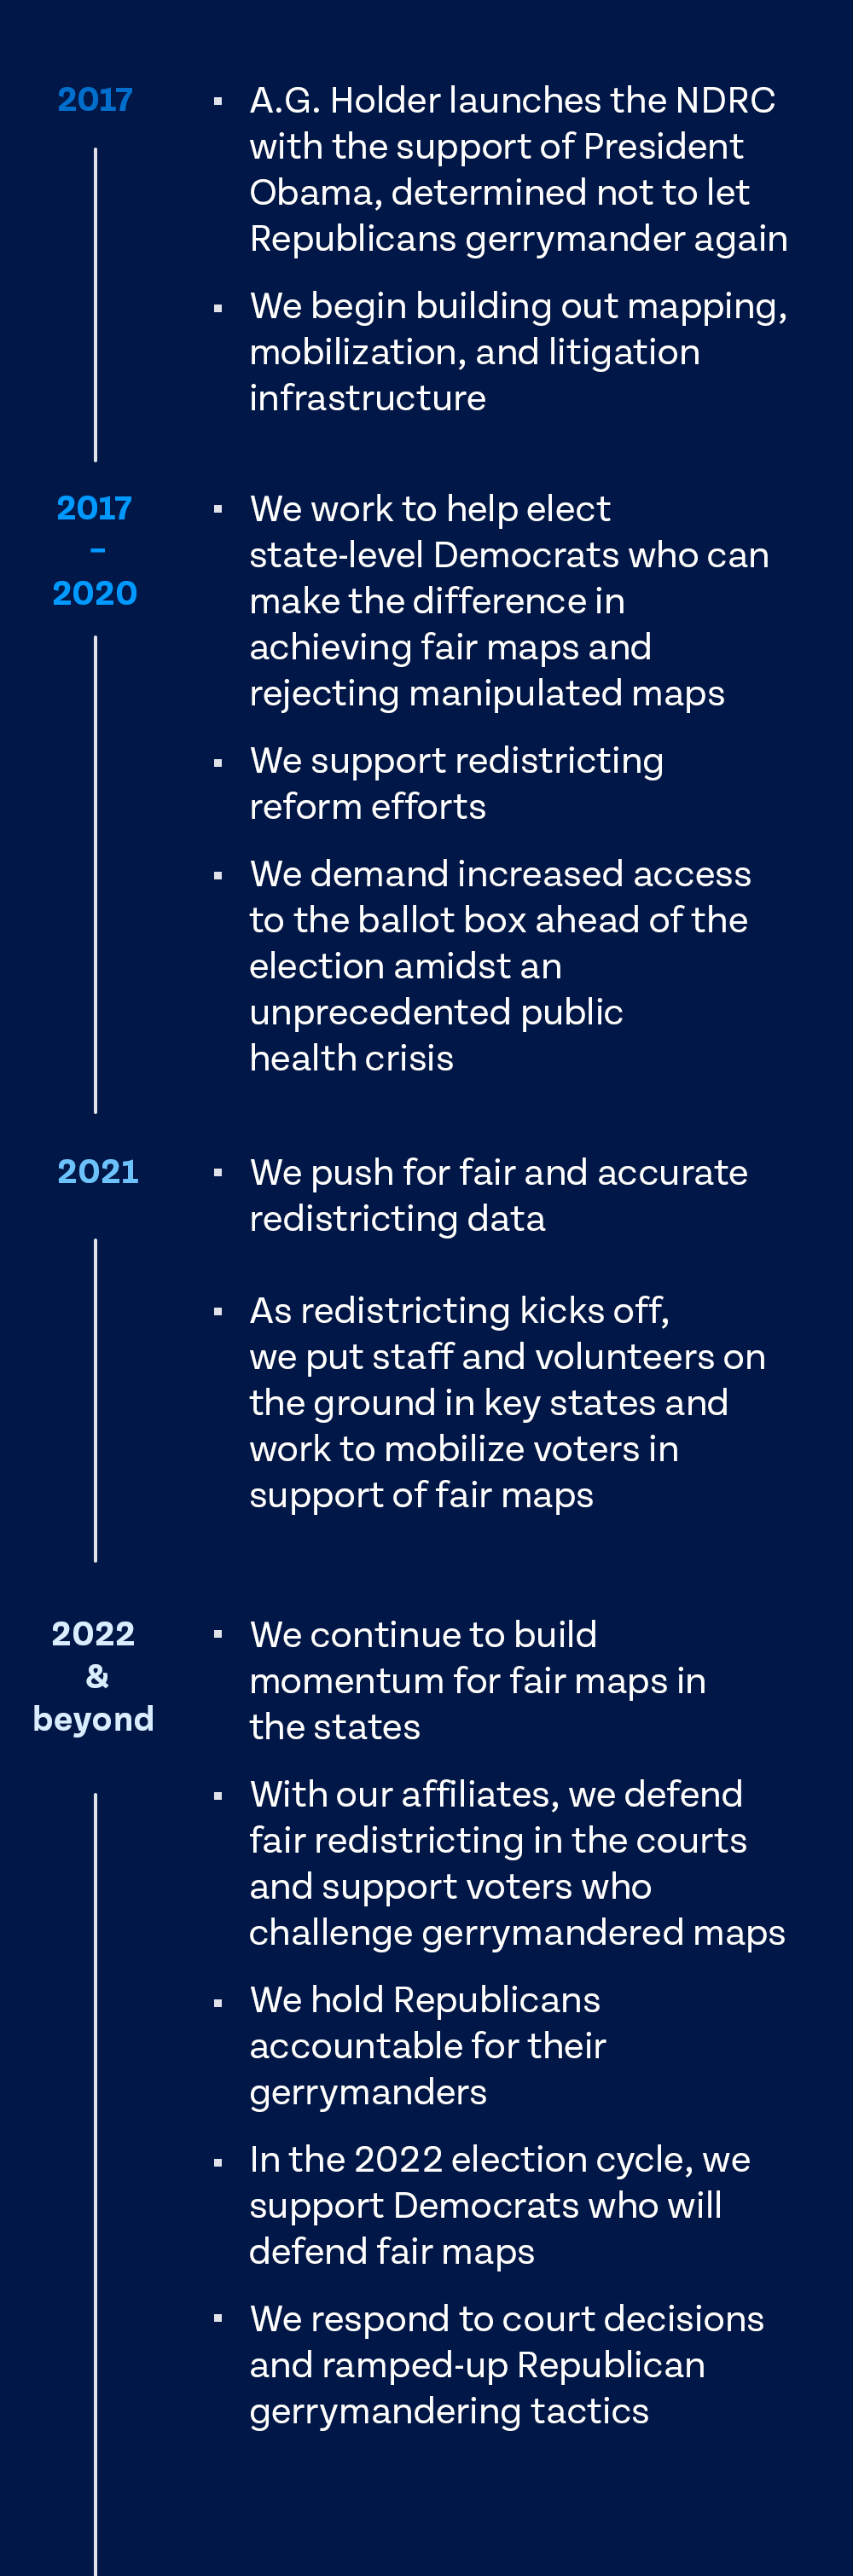 timeline graphic: 2017: A.G. Holder launches the NDRC with the support of President Obama, determined not to let Republicans gerrymander again. We begin building out mapping, mobilization, and litigation infrastructure. 2017-2020: We work to help elect state-level Democrats who can make the difference in achieving fair maps and rejecting manipulated maps. We support redistricting reform efforts. We demand increased access to the ballot box ahead of the election amidst an unprecedented public health crisis. 2021: We push for fair and accurate redistricting data. As redistricting kicks off, we put staff and volunteers on the ground in key states and work to mobilize voters in support of fair maps. 2022 and beyond: We continue to build momentum for fair maps in the states. With our affiliates, we defend fair redistricting in the courts and support voters who challenge gerrymandered maps. We hold Republicans accountable for their gerrymanders. In the 2022 election cycle, we support Democrats who will defend fair maps. We respond to court decisions and ramped-up Republican gerrymandering tactics